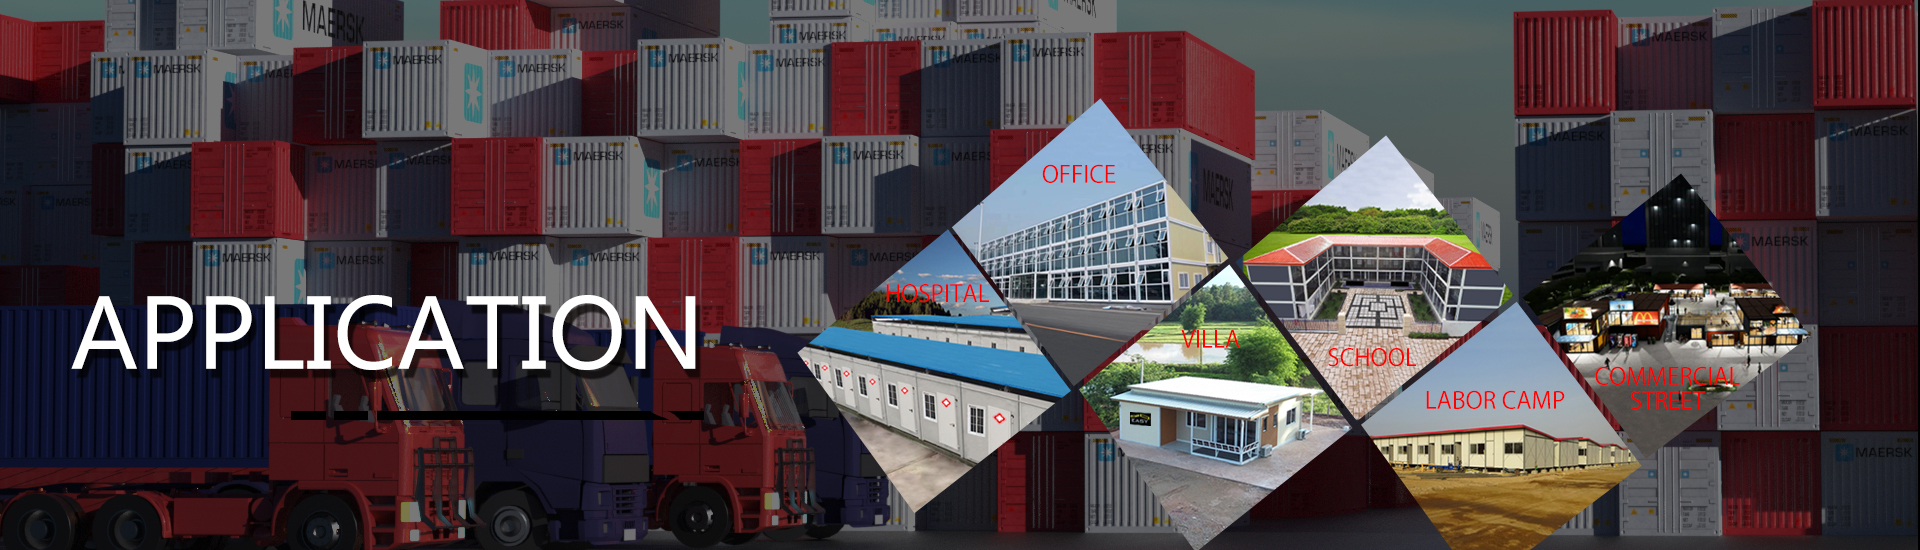 news-WELLCAMP, WELLCAMP prefab house, WELLCAMP container house-Wellcamp Fight in 119th Canton Fair i-2